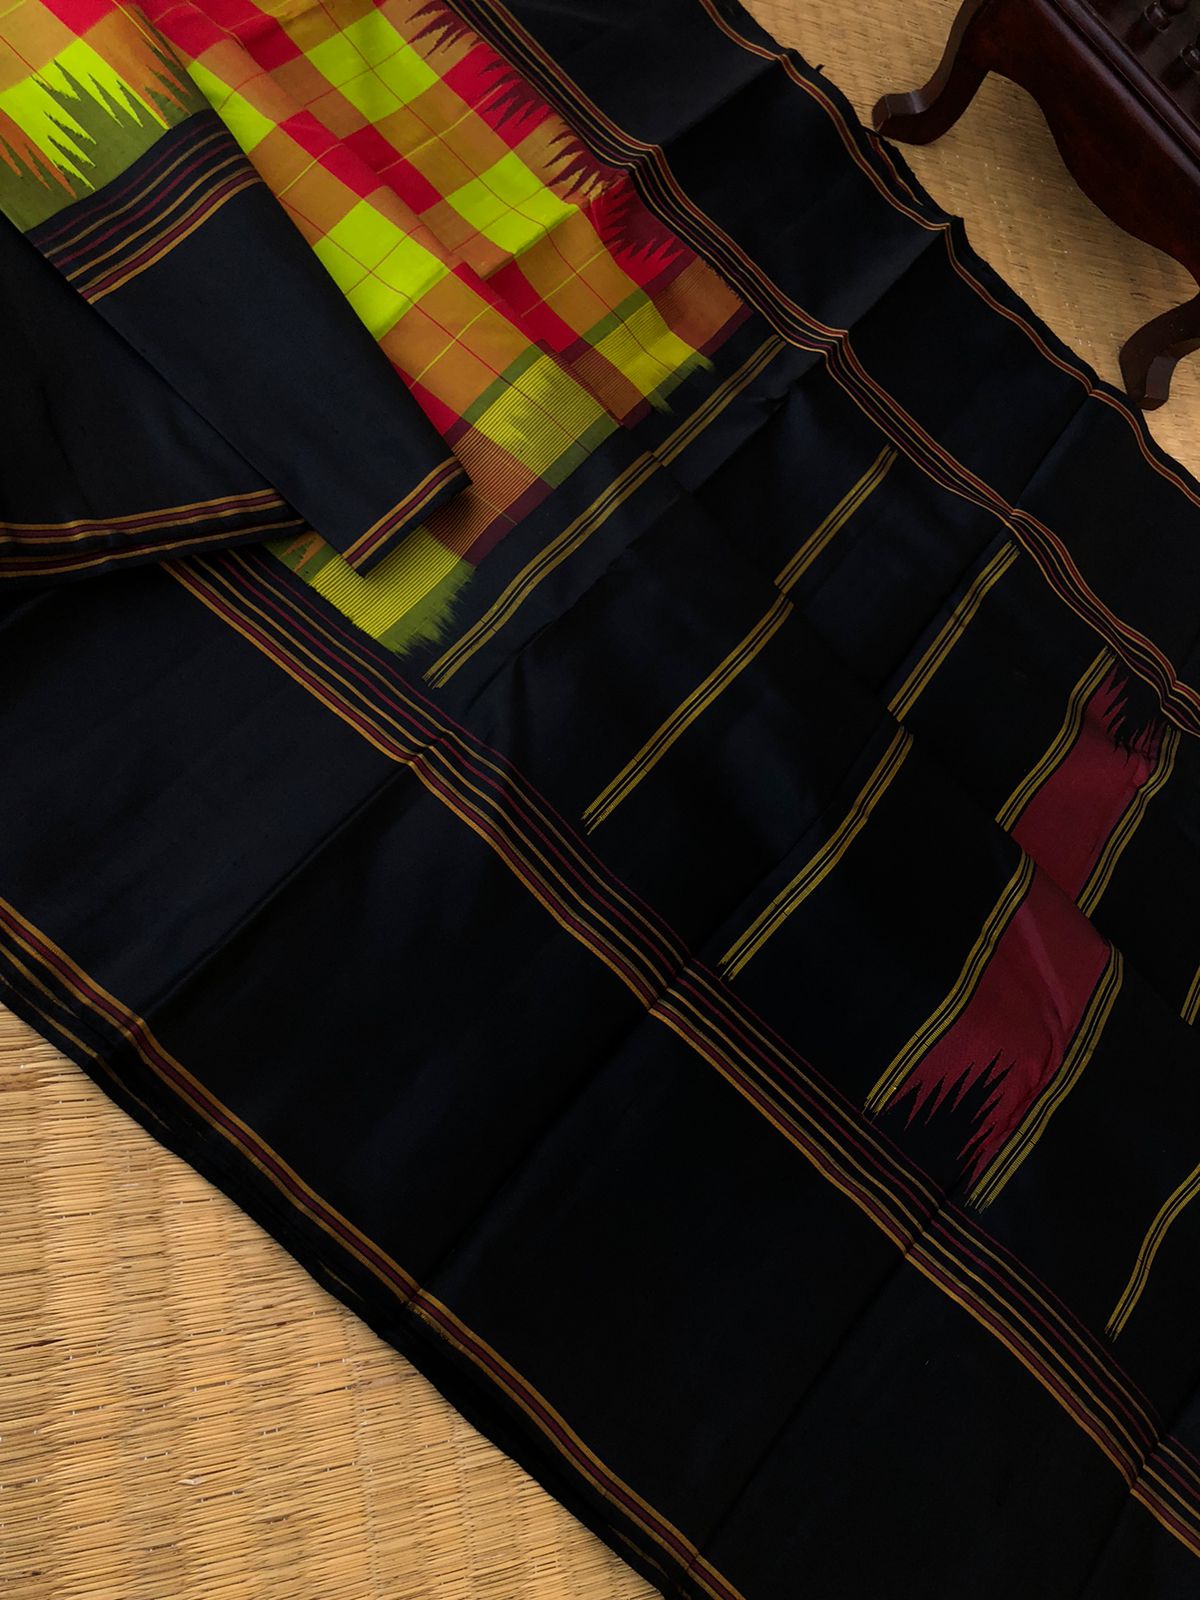 Korvai Connection on Kanchivaram - the traditional elements of red and green chex woven body with black no zari korvai woven borders and pallu